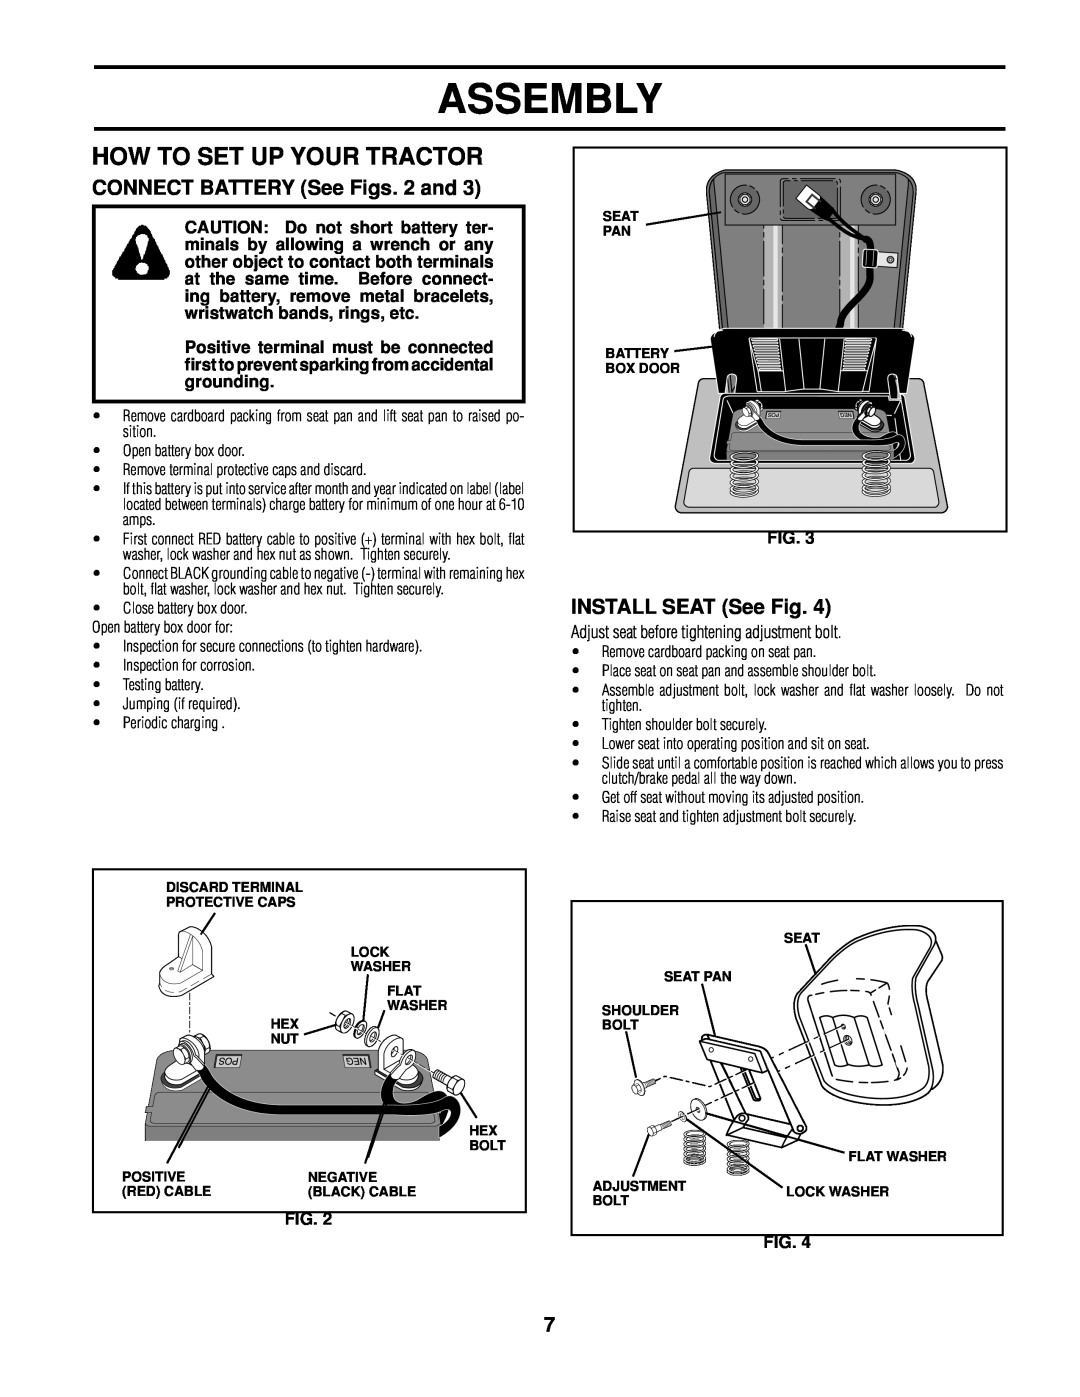 Poulan 161608 owner manual How To Set Up Your Tractor, Assembly, CONNECT BATTERY See Figs. 2 and, INSTALL SEAT See Fig 